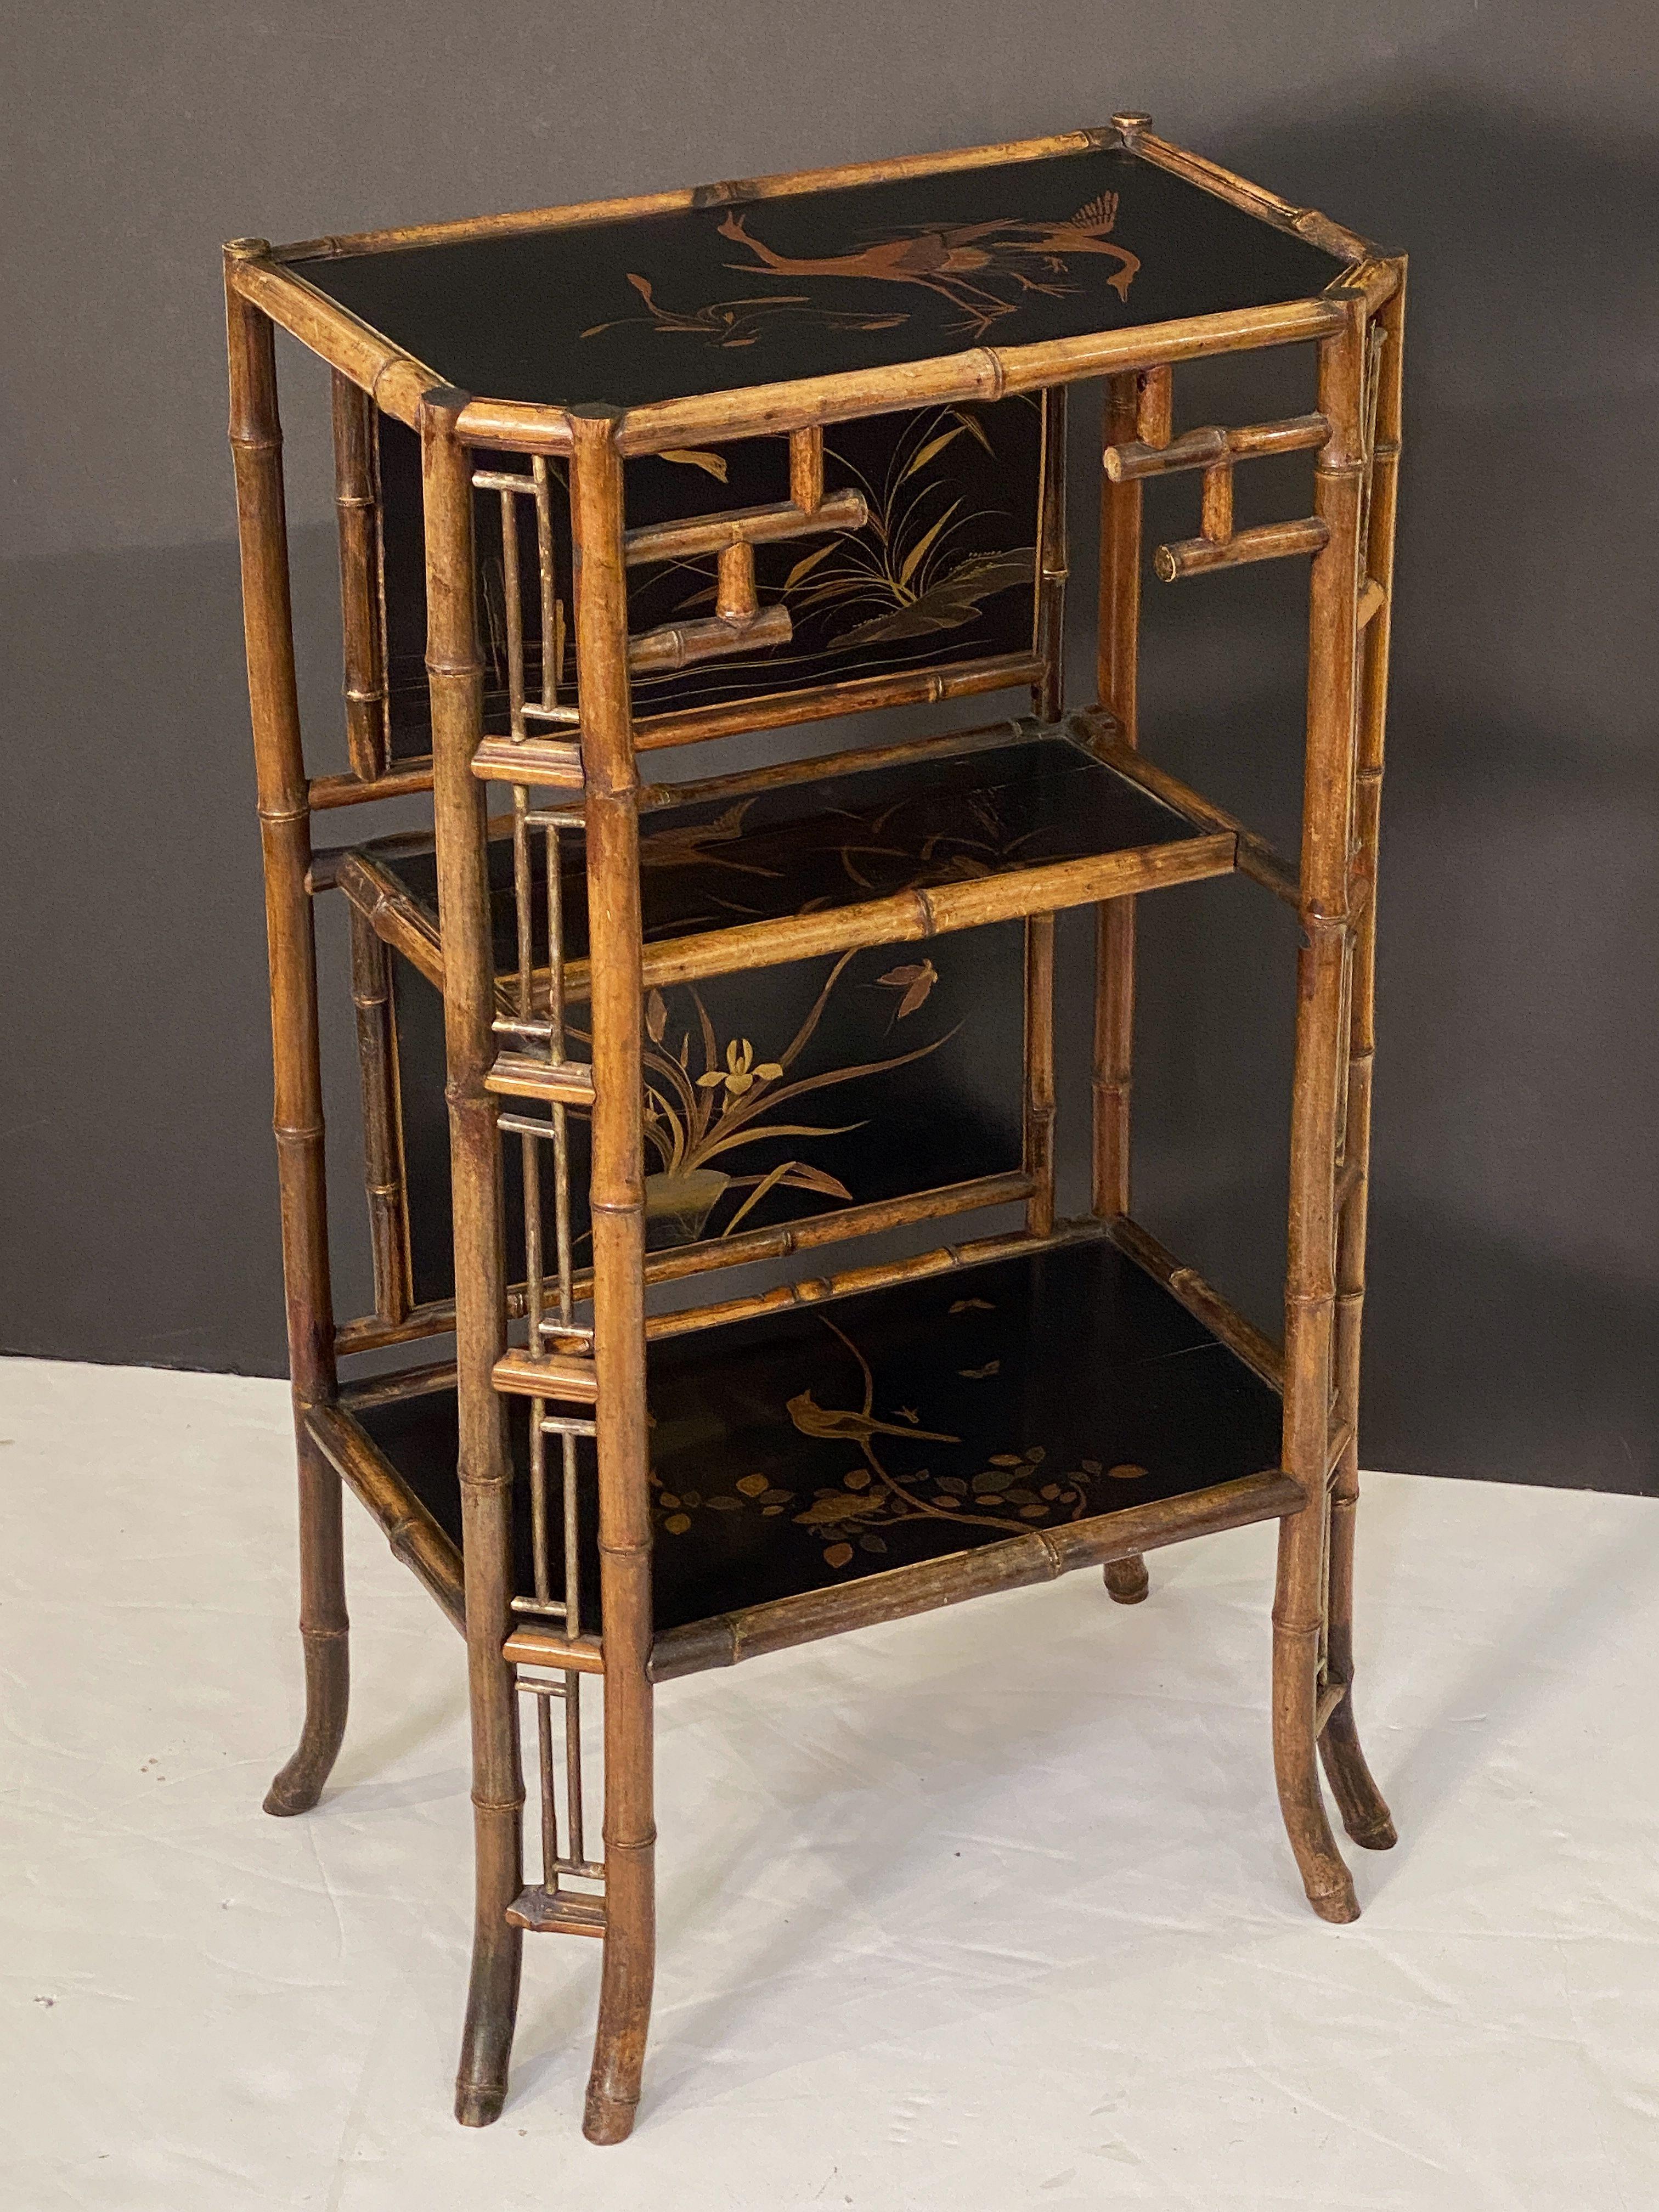 A fine collector's quality English bamboo table stand or etagere shelf cabinet from the Aesthetic Movement period, circa 1870-1910, featuring a rectangular canted top with Japan lacquered chinoiserie design, over a stretcher base with two shelves